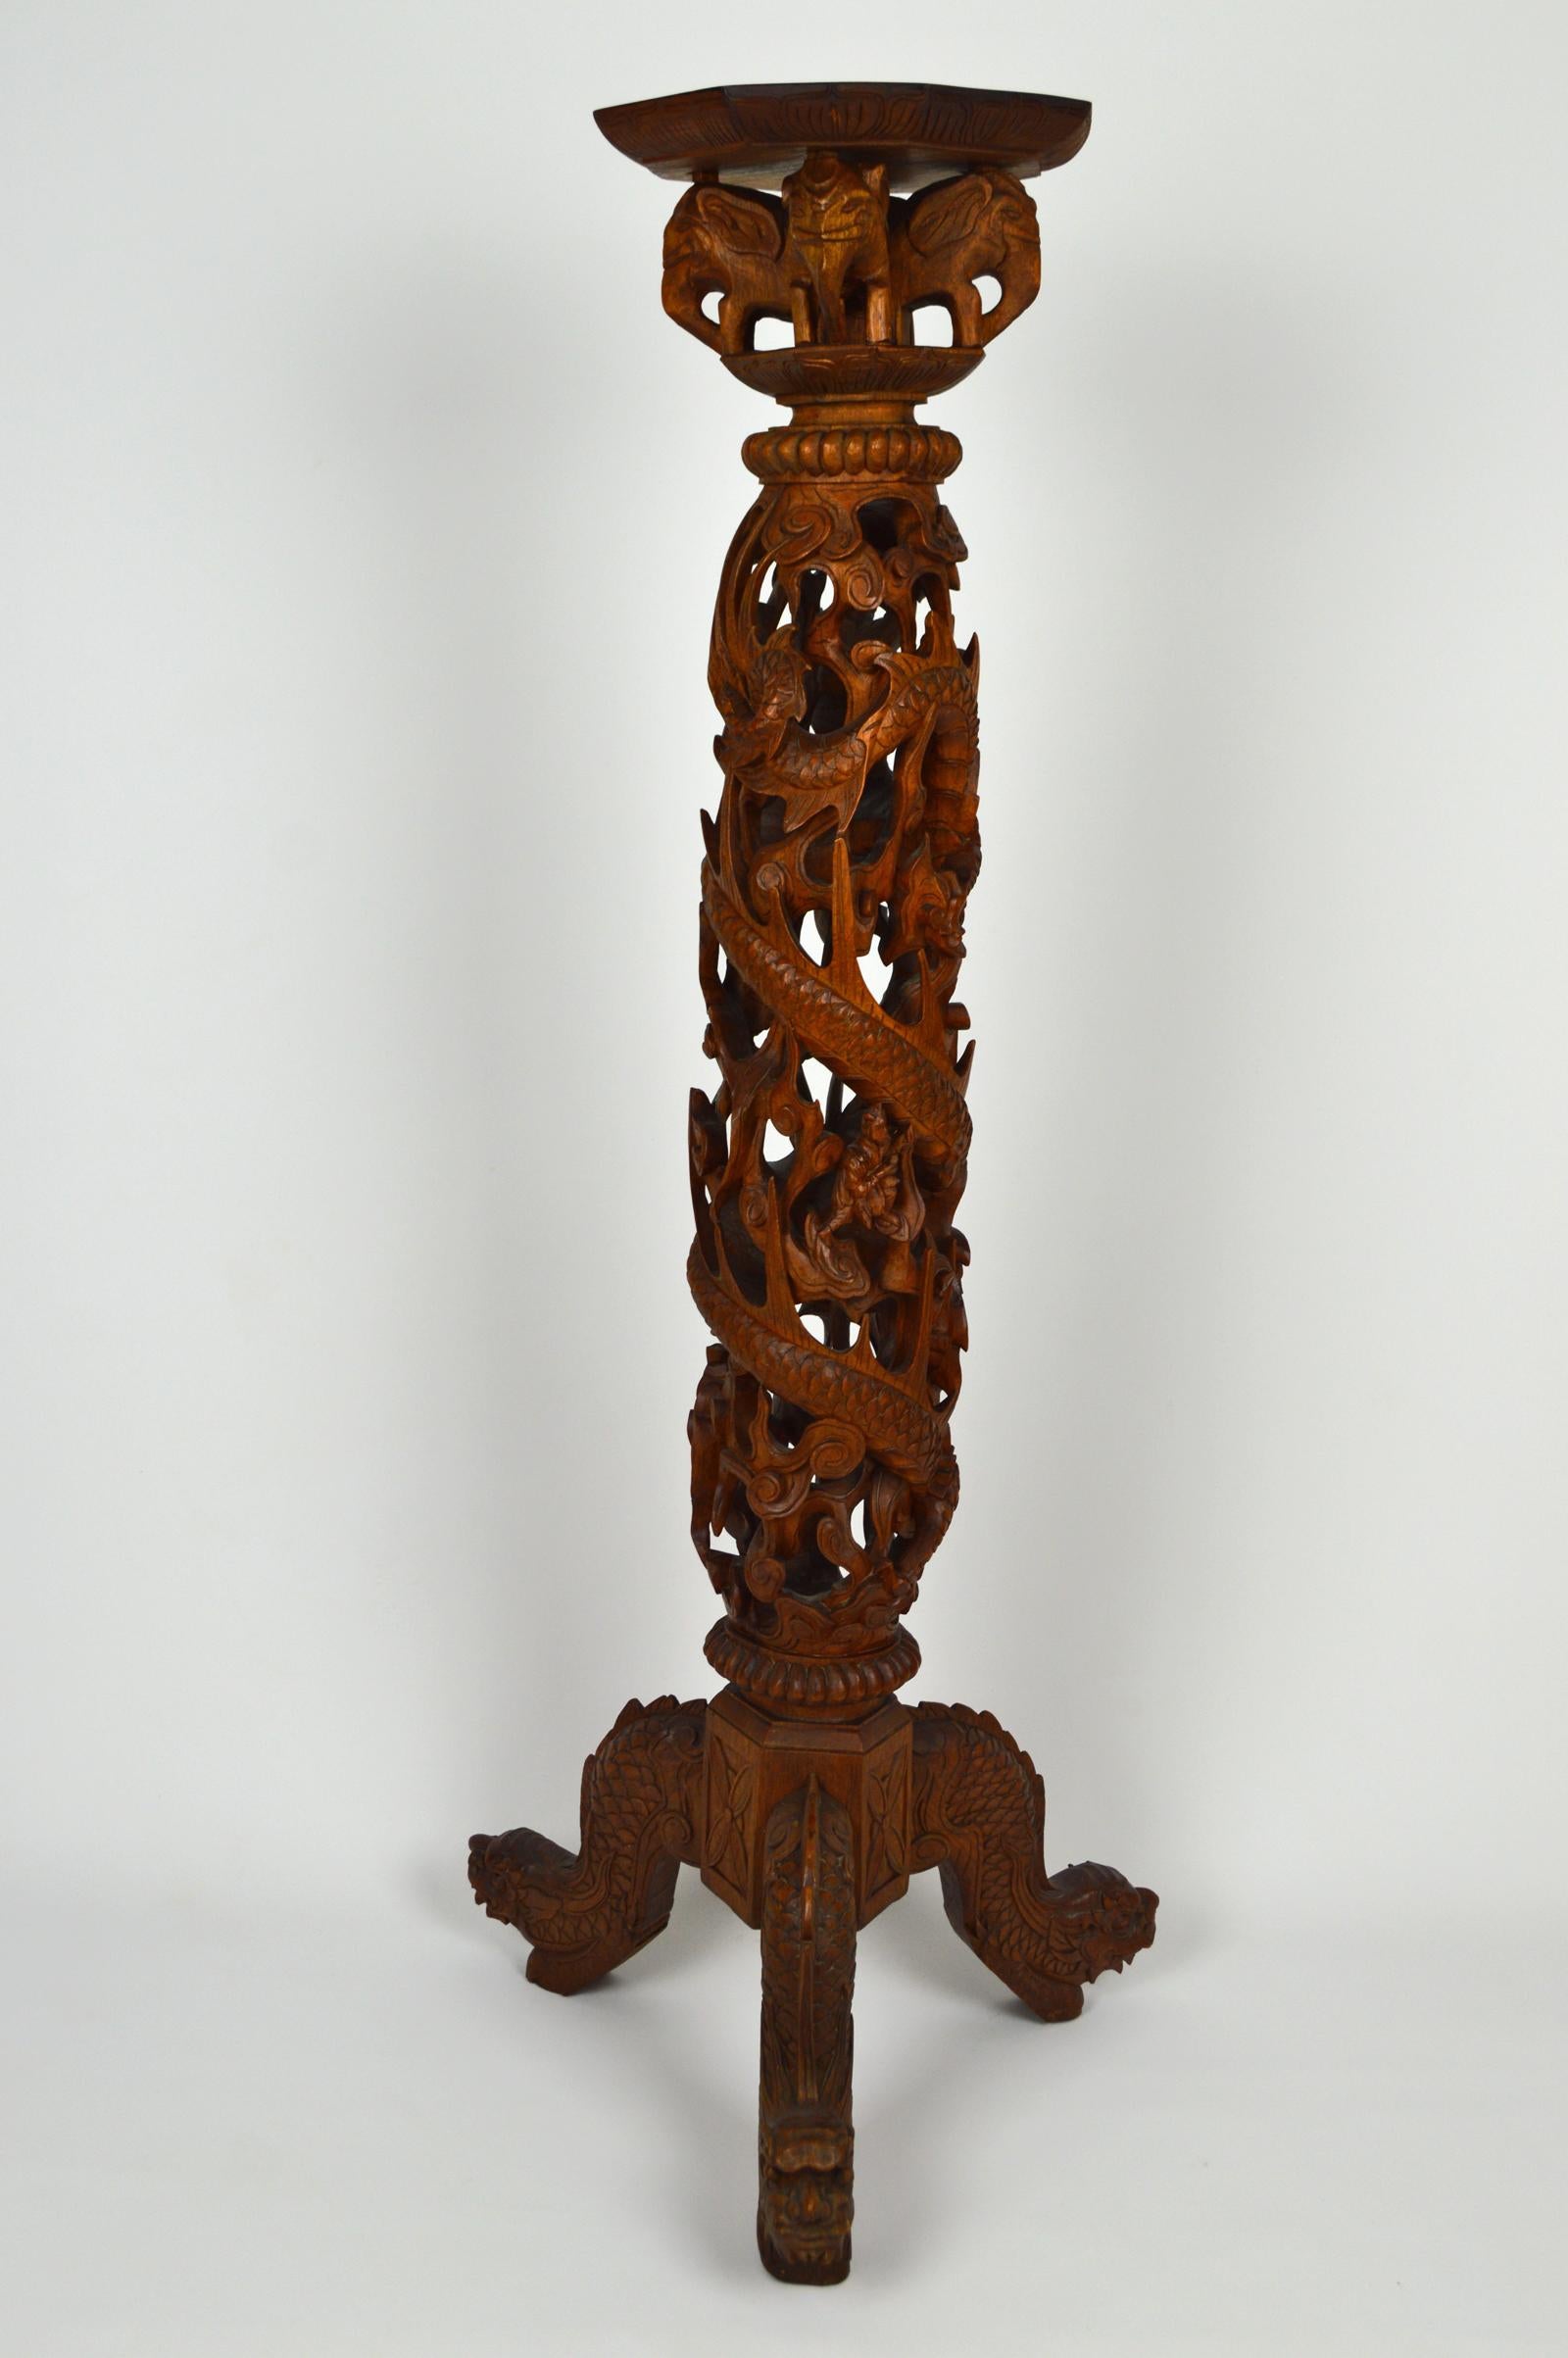 Japonisme Indochinese Pedestal Table / Pot Stand in Carved Wood, Mythological Theme, 1890s For Sale